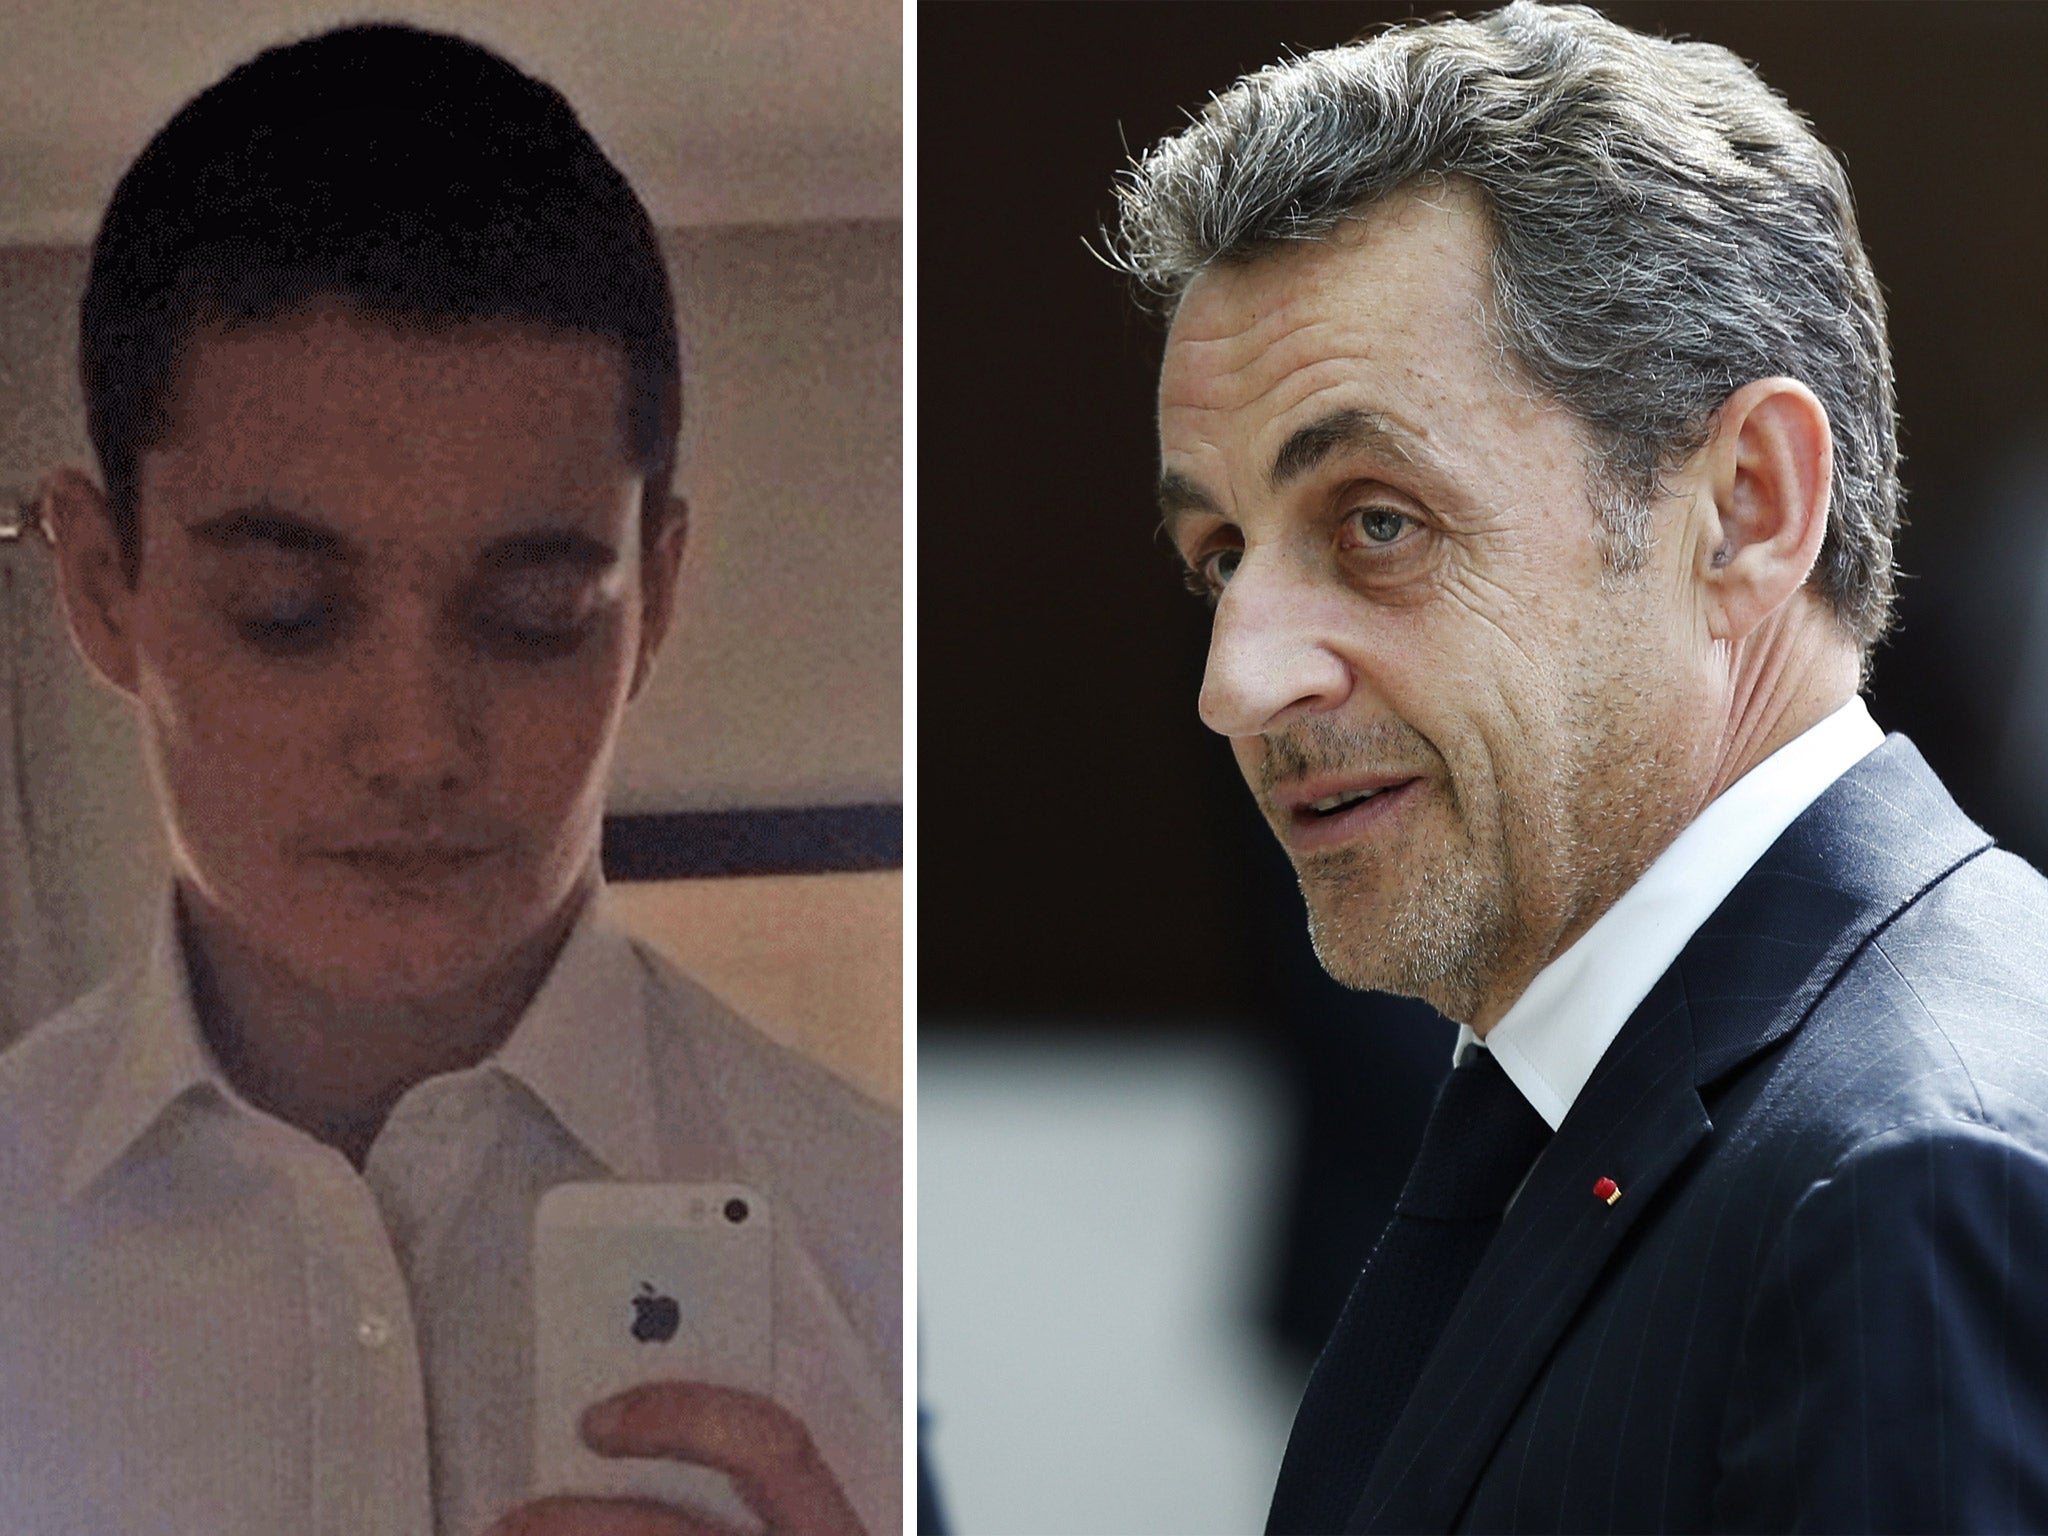 Louis Sarkozy's profile picture on Twitter; his father and former French president Nicolas Sarkozy